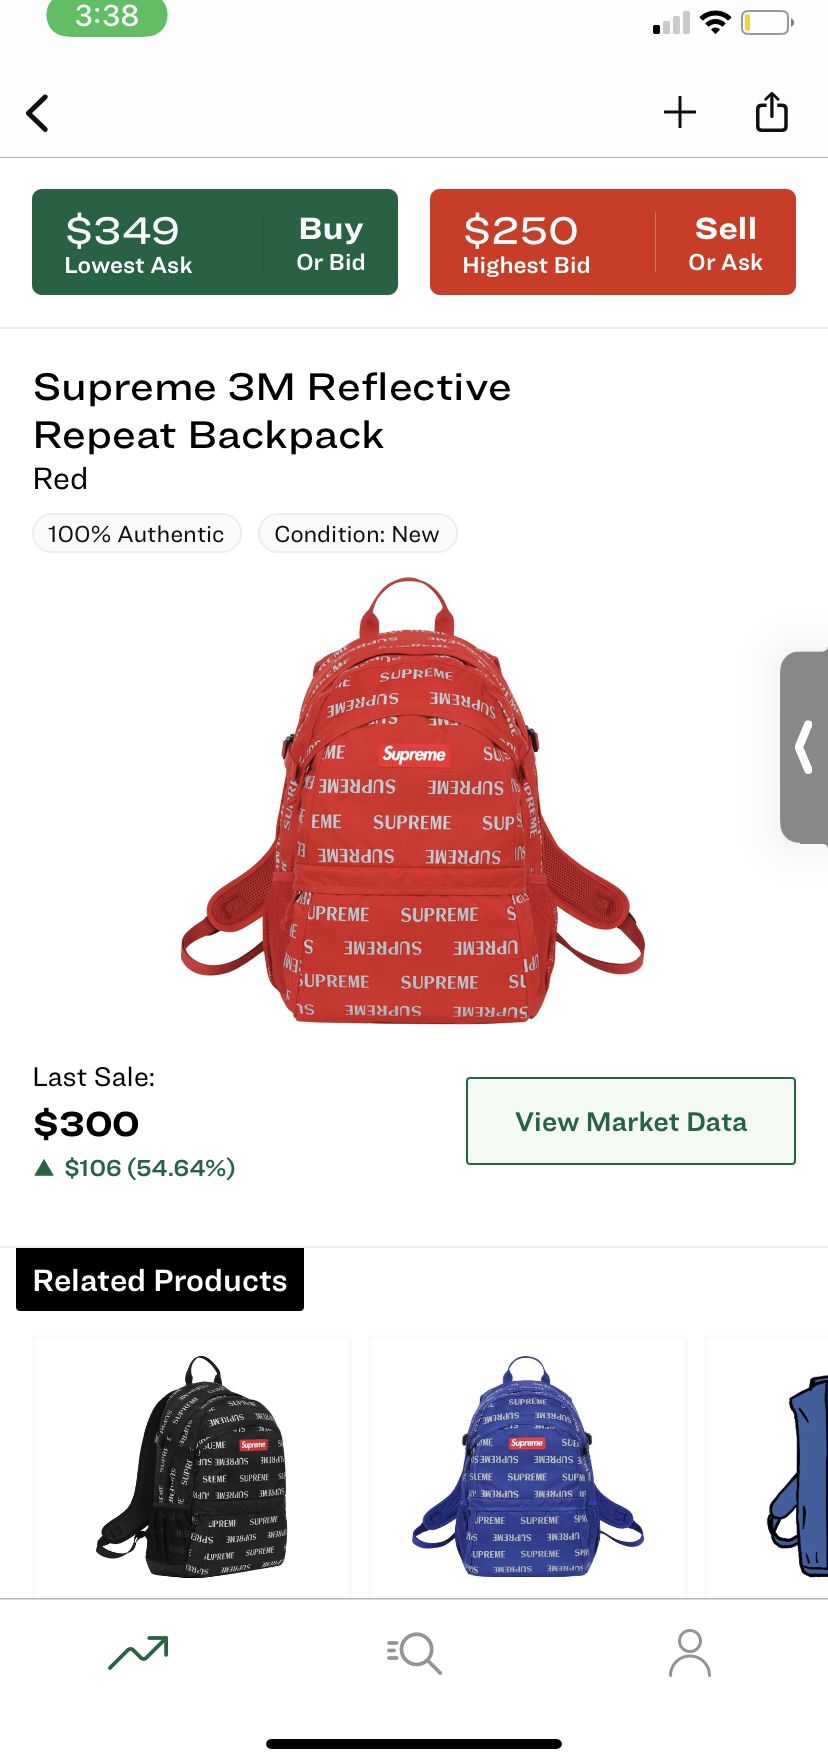 Red Supreme 3m Reflective Backpack 